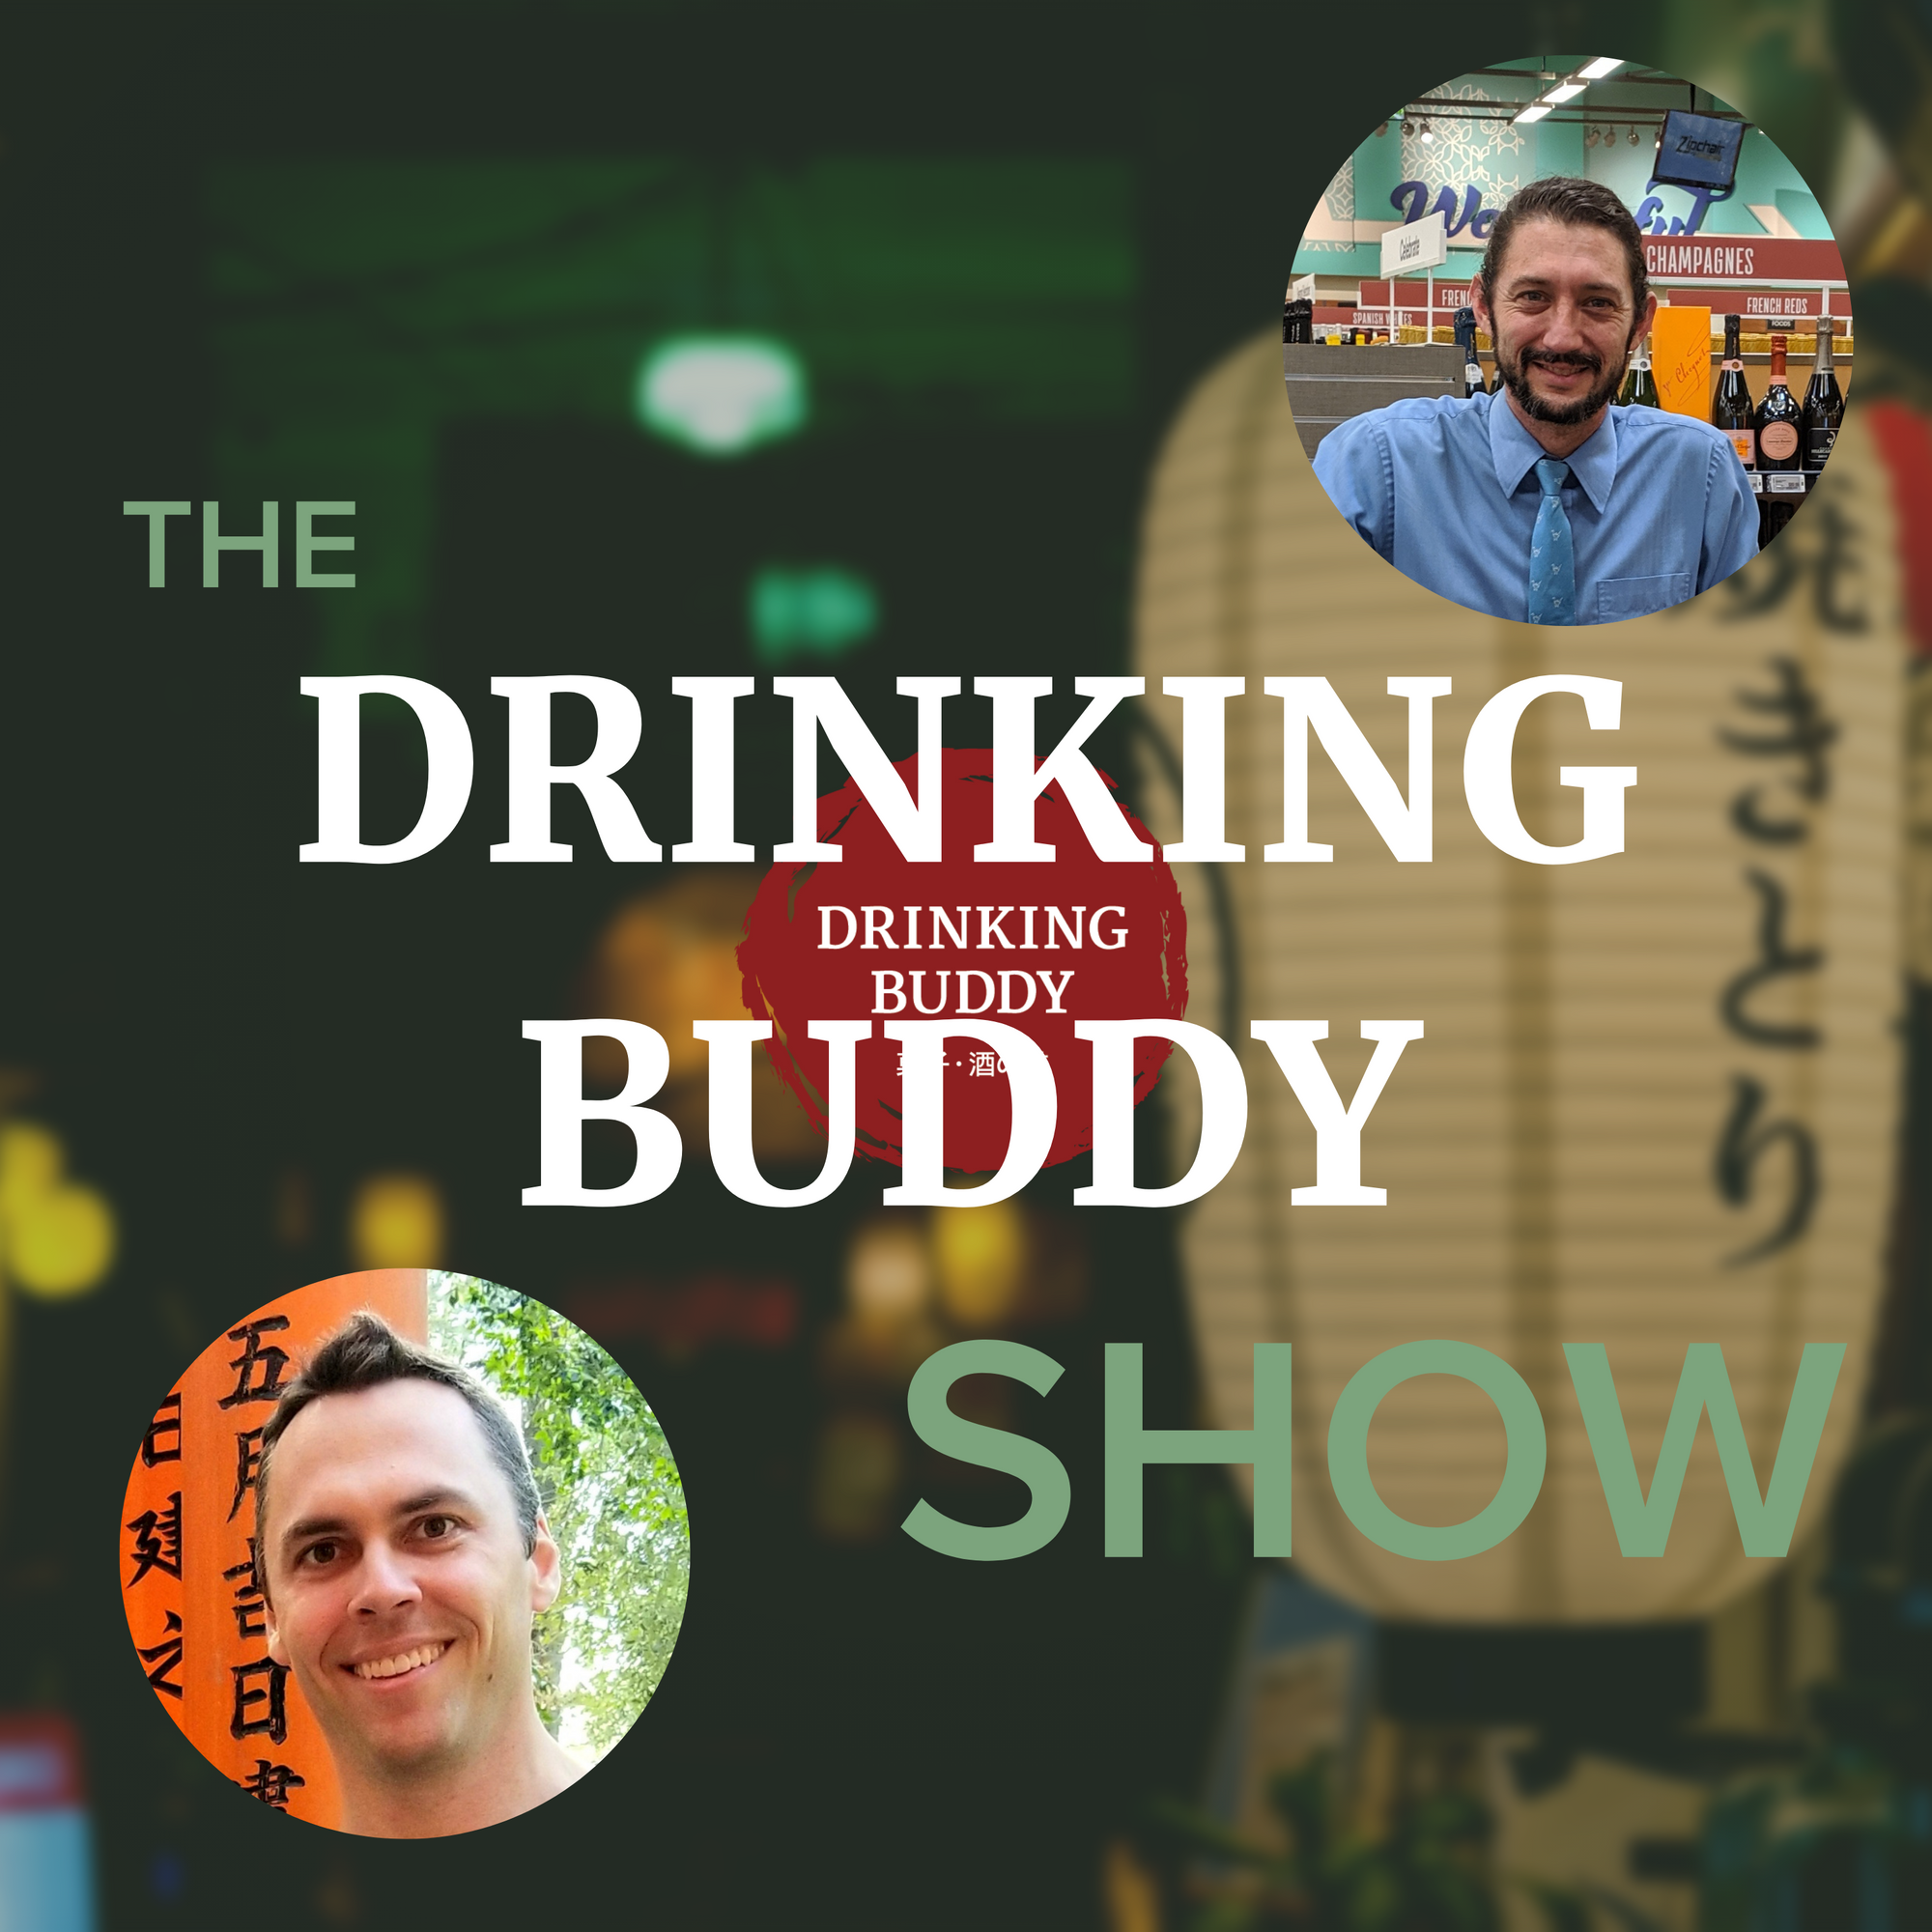 The Drinking Buddy Show Episode 2: Greg Beck – The Accidental Sake Expert